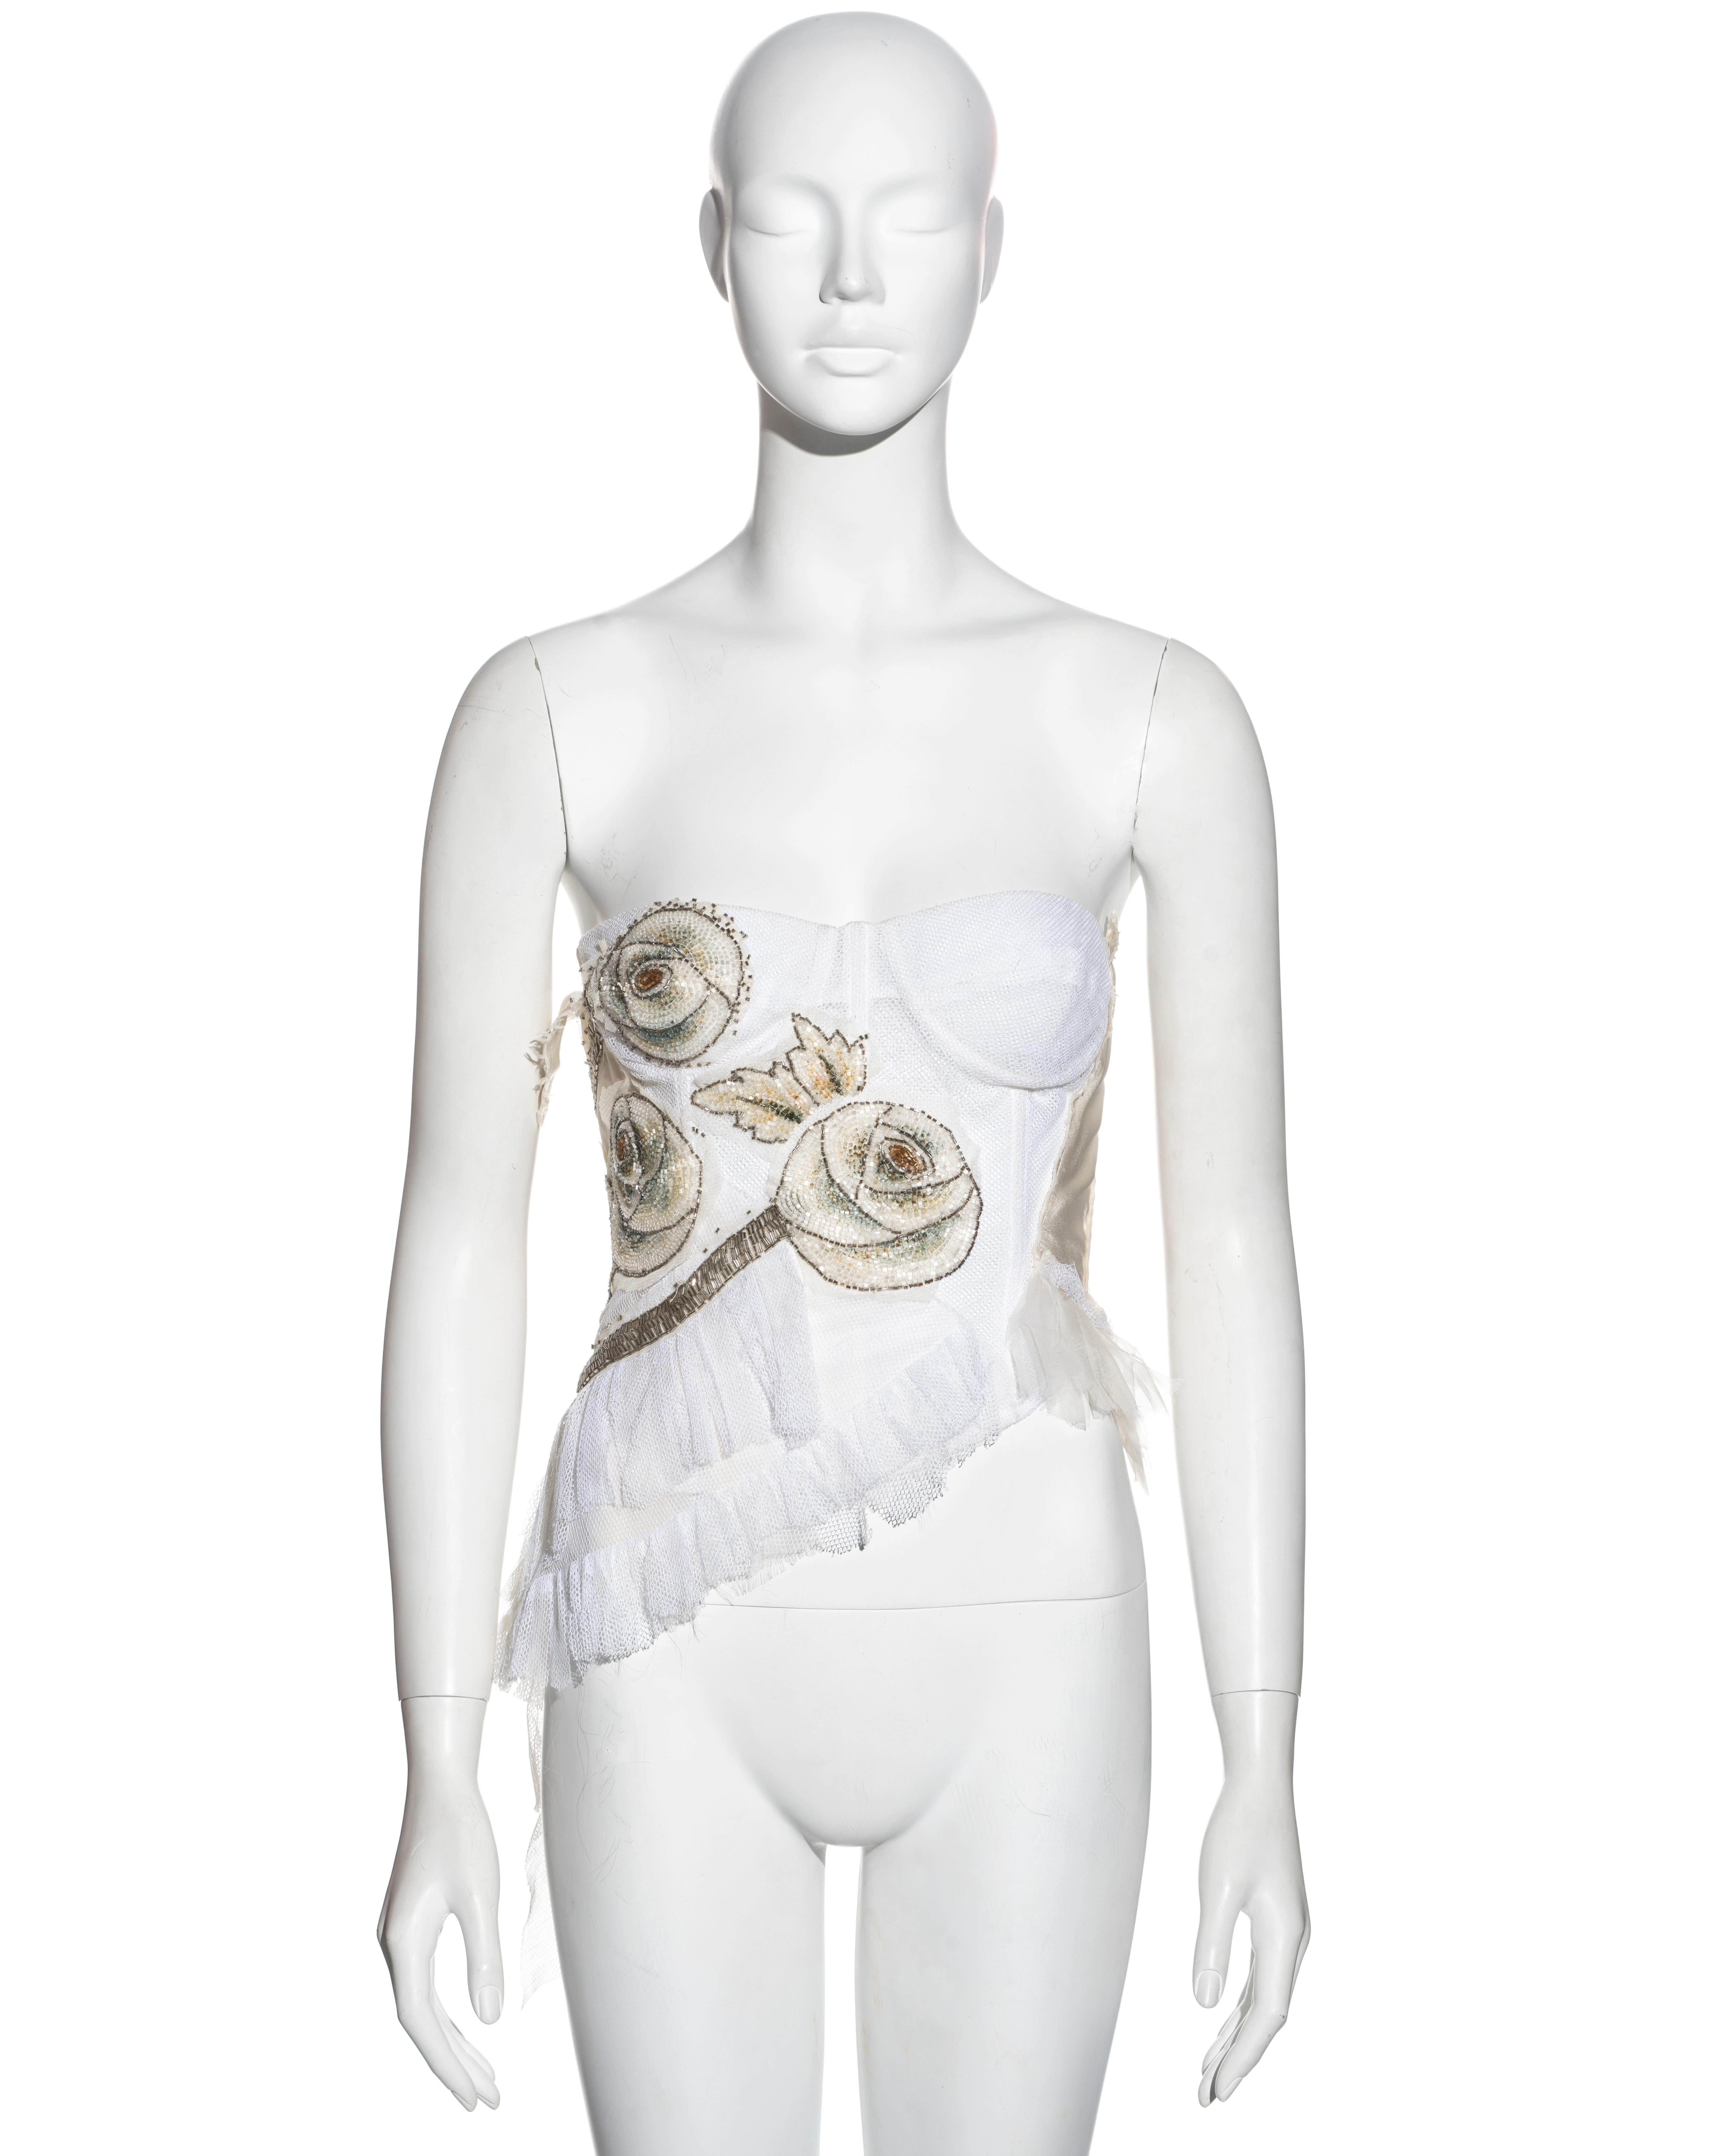 ▪ Rare Christian Dior white corset top 
▪ Designed by John Galliano 
▪ Ivory silk with white cotton tulle overlay 
▪ Floral bugle-beaded embellishments 
▪ Underwire bra 
▪ Ruffled trim with frayed edge 
▪ Metal zipper with Dior 'D' zip pull 
▪ Wrap